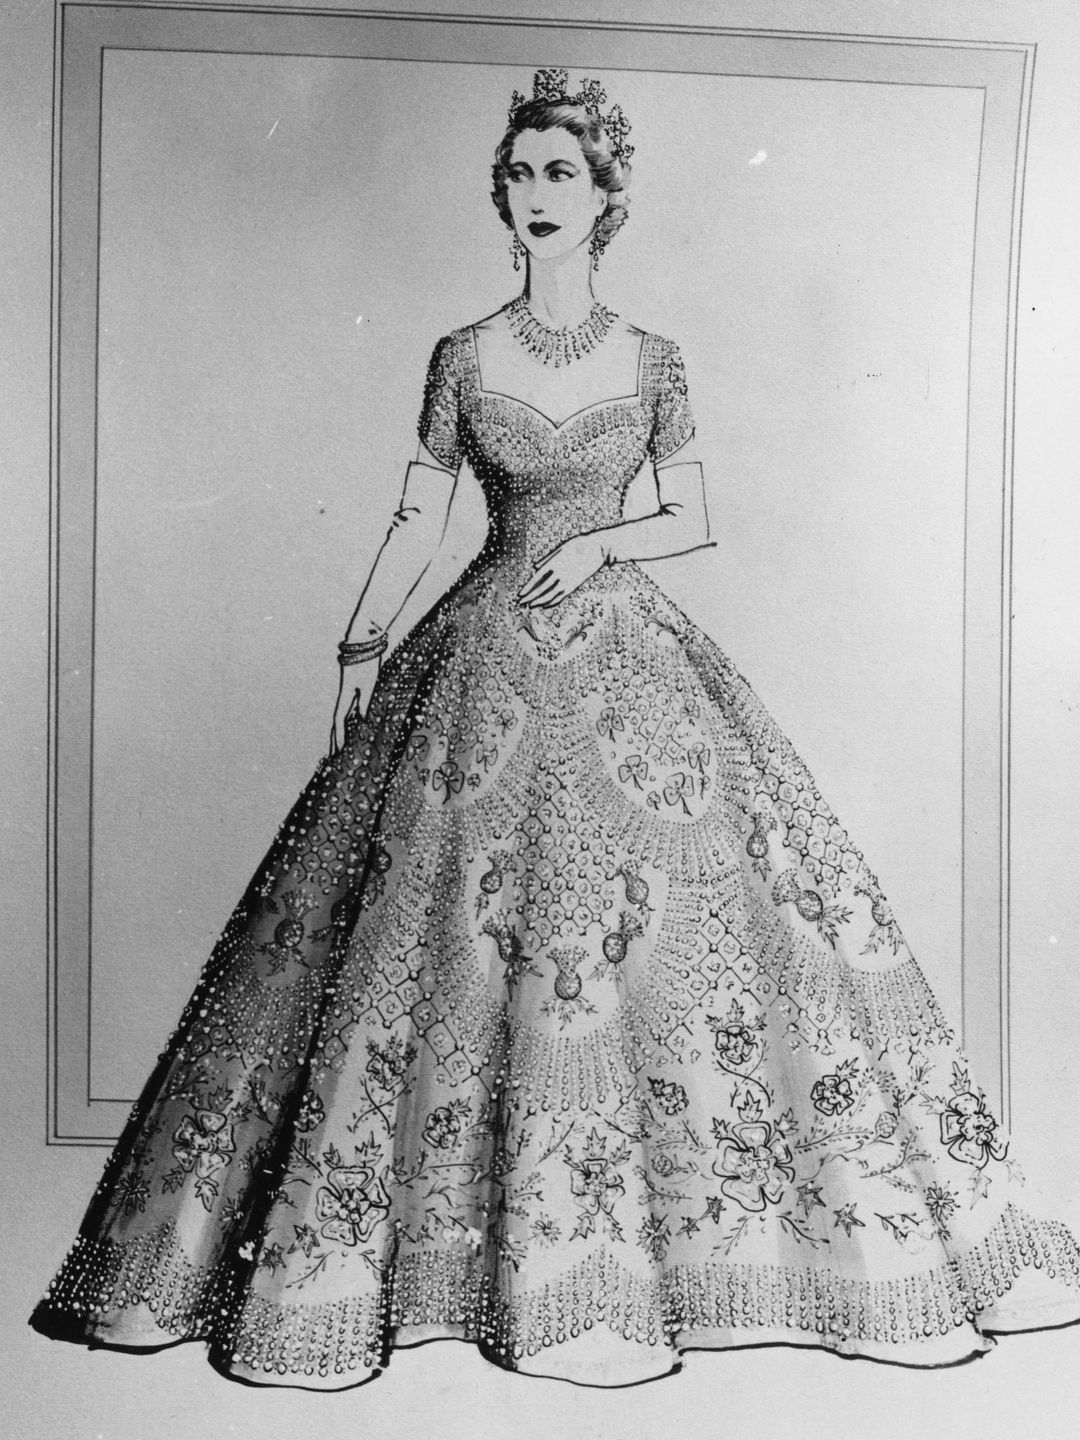 June 1953:  Norman Hartnell design of Queen Elizabeth's dress for the Coronation ceremony. Original Publication: Picture Post - 6540 - Under The Red Robe - pub. 1953  (Photo by Haywood Magee/Picture Post/Getty Images)